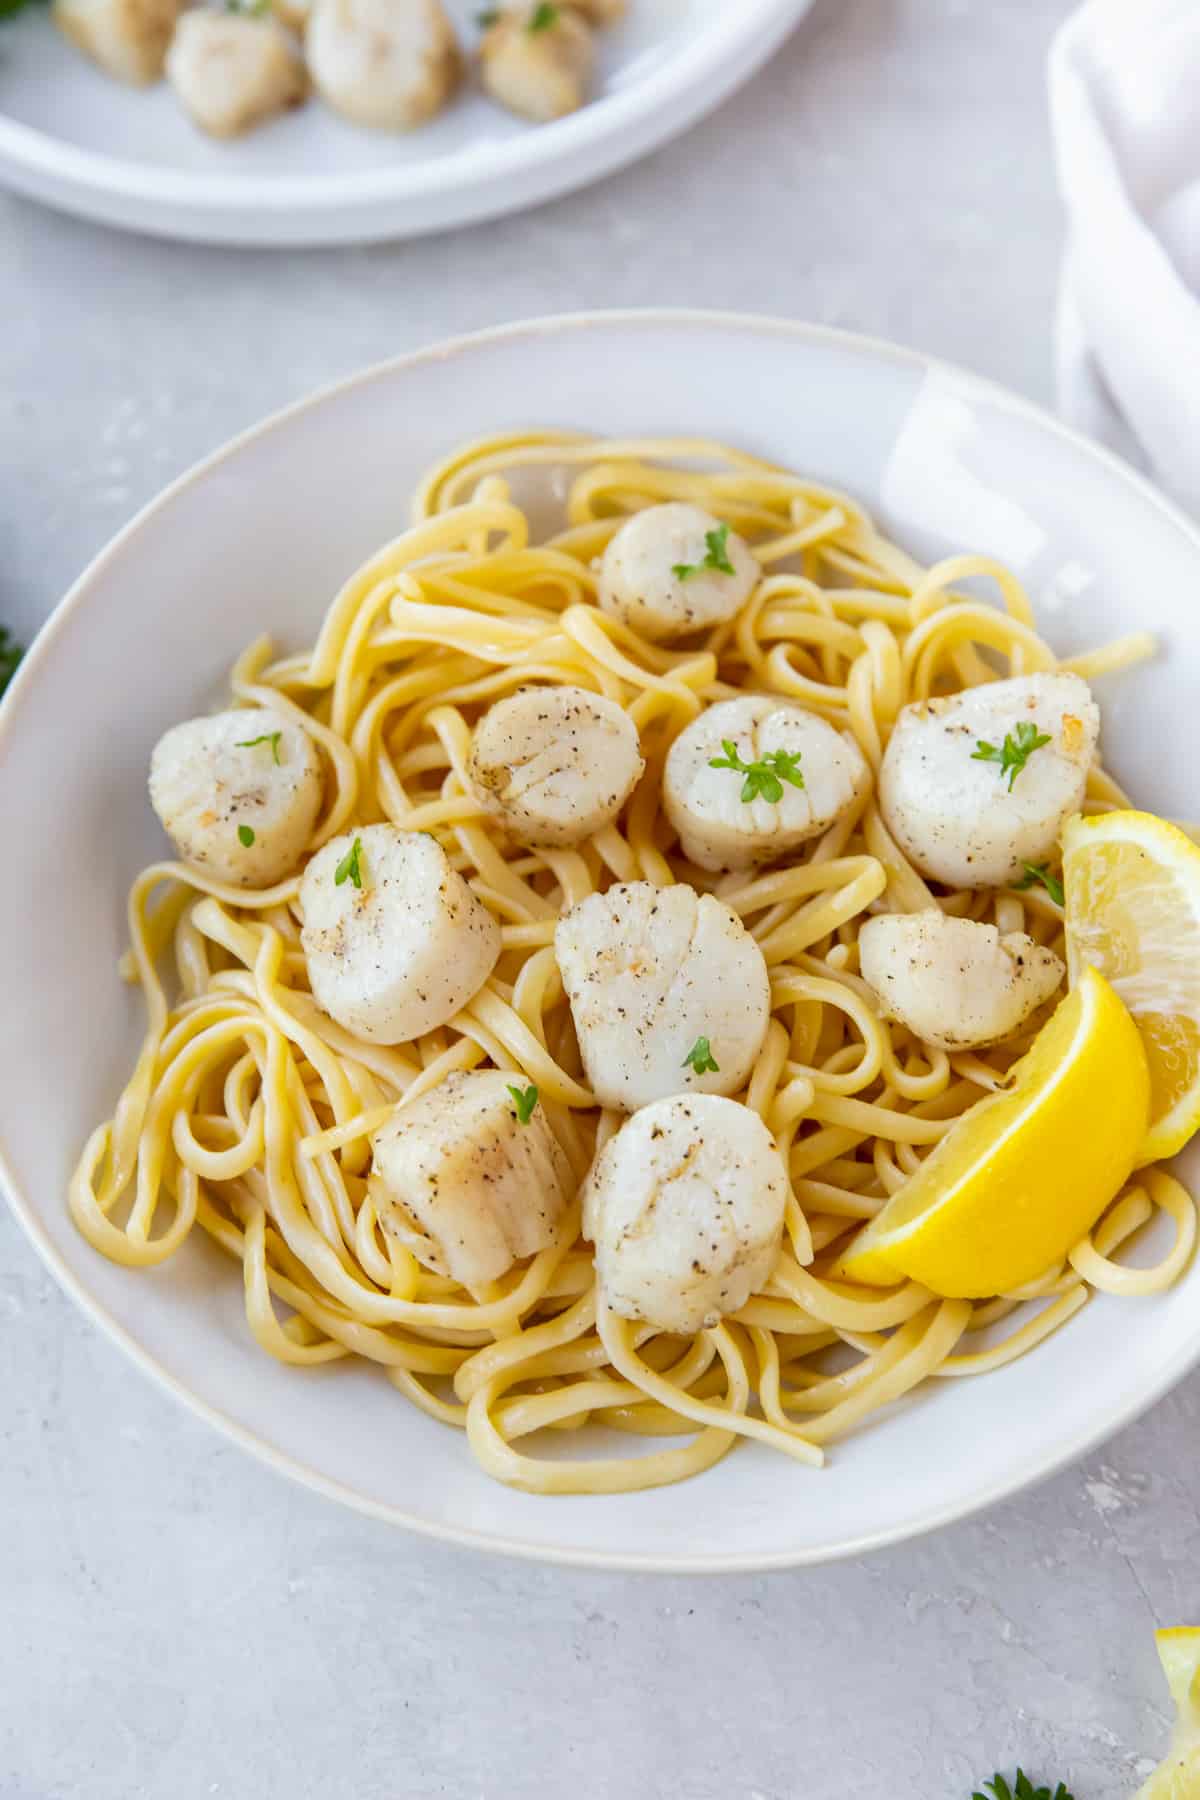 Scallops over pasta in a bowl with lemon wedges.